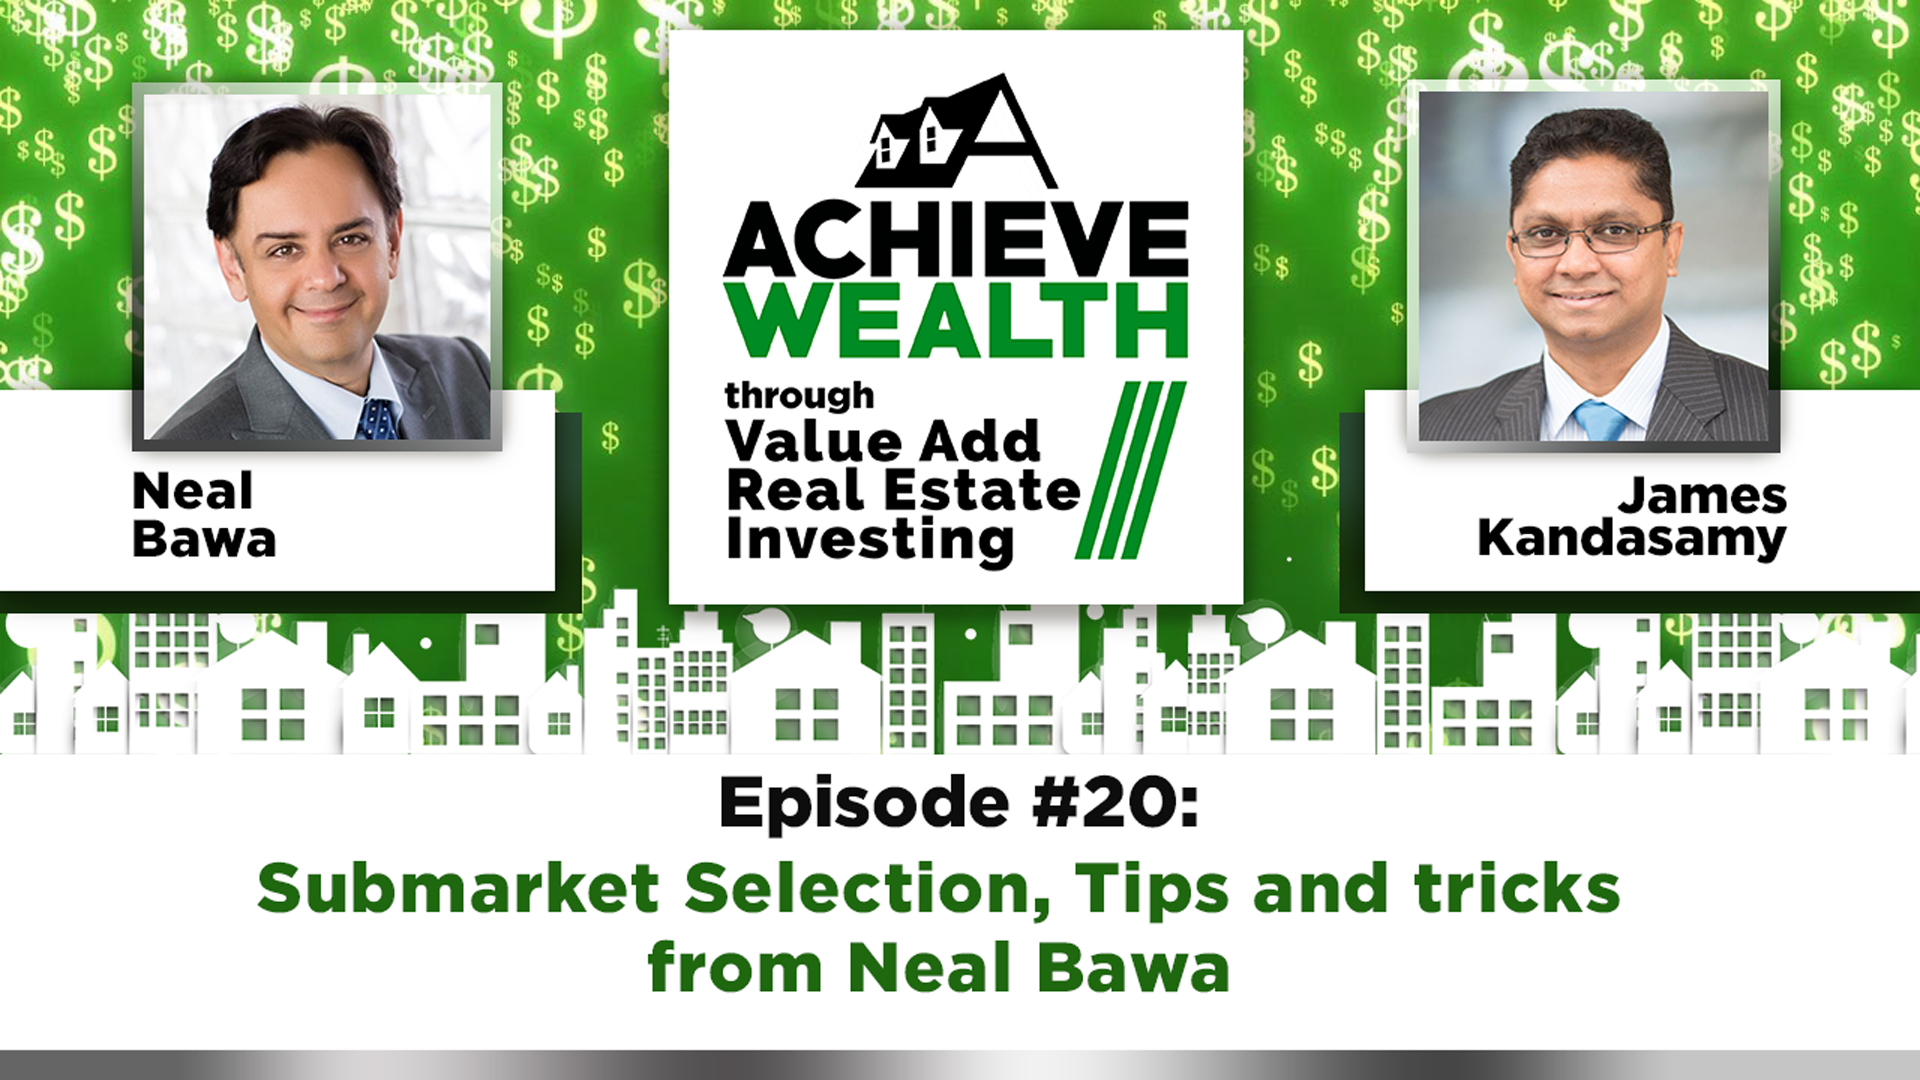 Submarket Selection, Tips and tricks from Neal Bawa